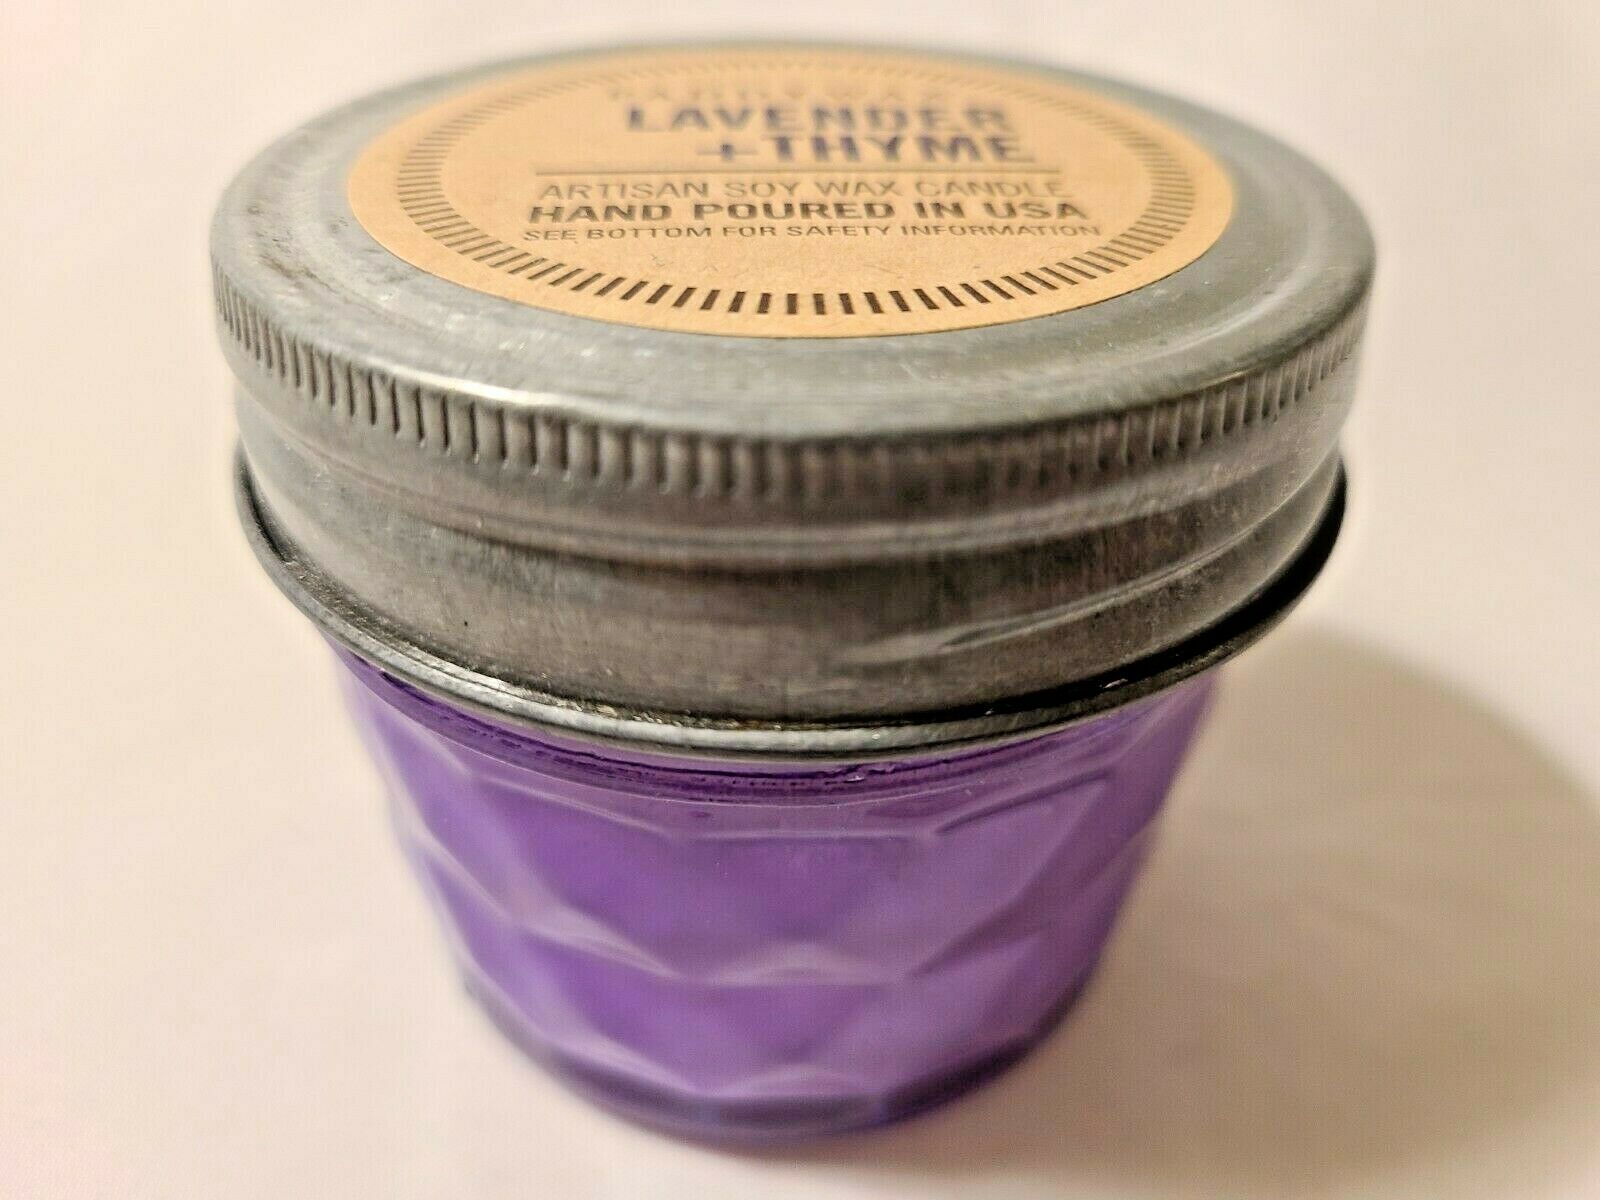 Paddywax Artisan Soy Wax Candle Lavender + Thyme Hand Poured in the USA 3 Ounce - $22.99